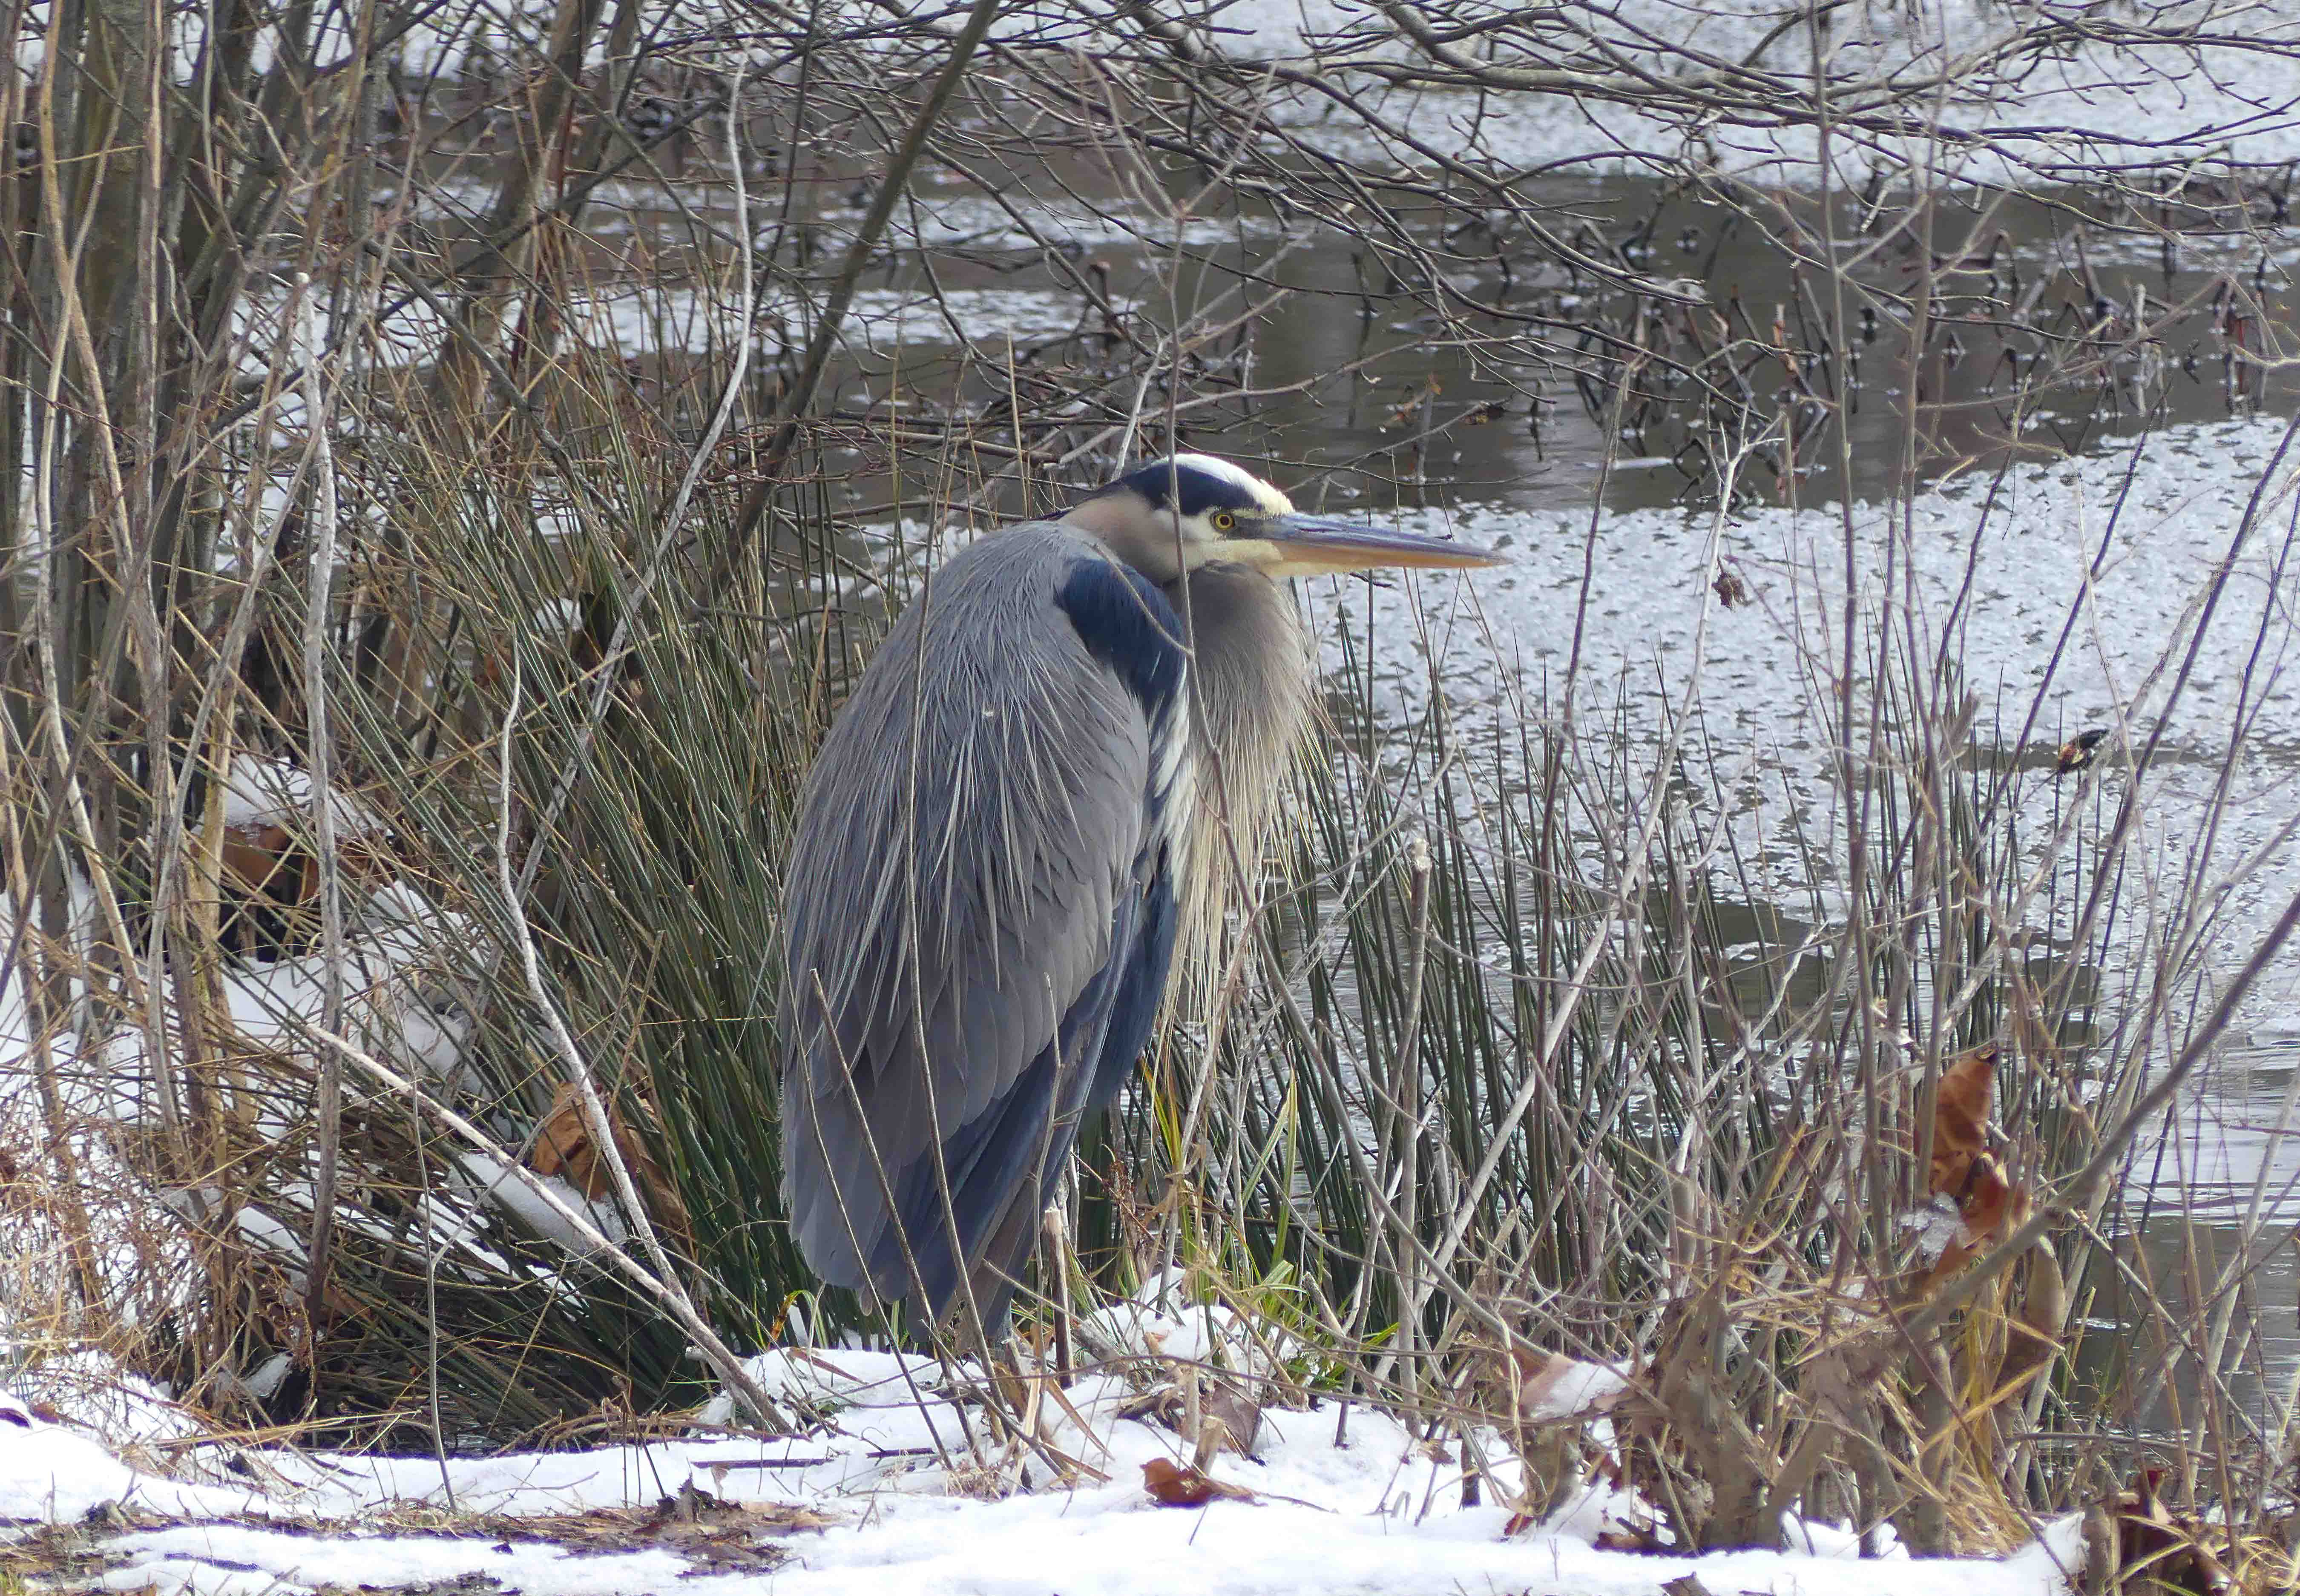 The Great Blue Heron and chillin' out